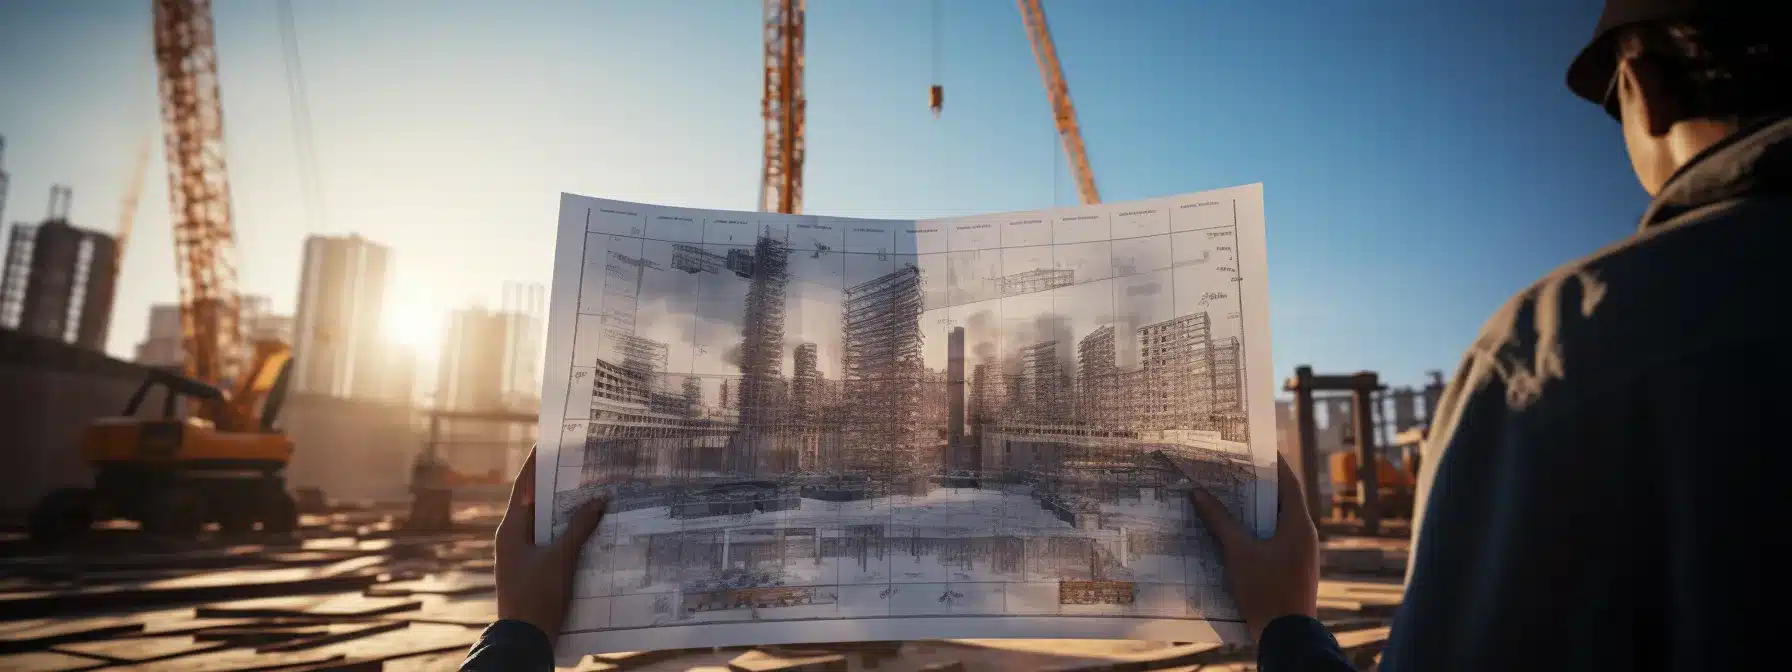 A Person Holding A Blueprint And Standing In Front Of A Construction Site With A Skyscraper Being Built In The Background.